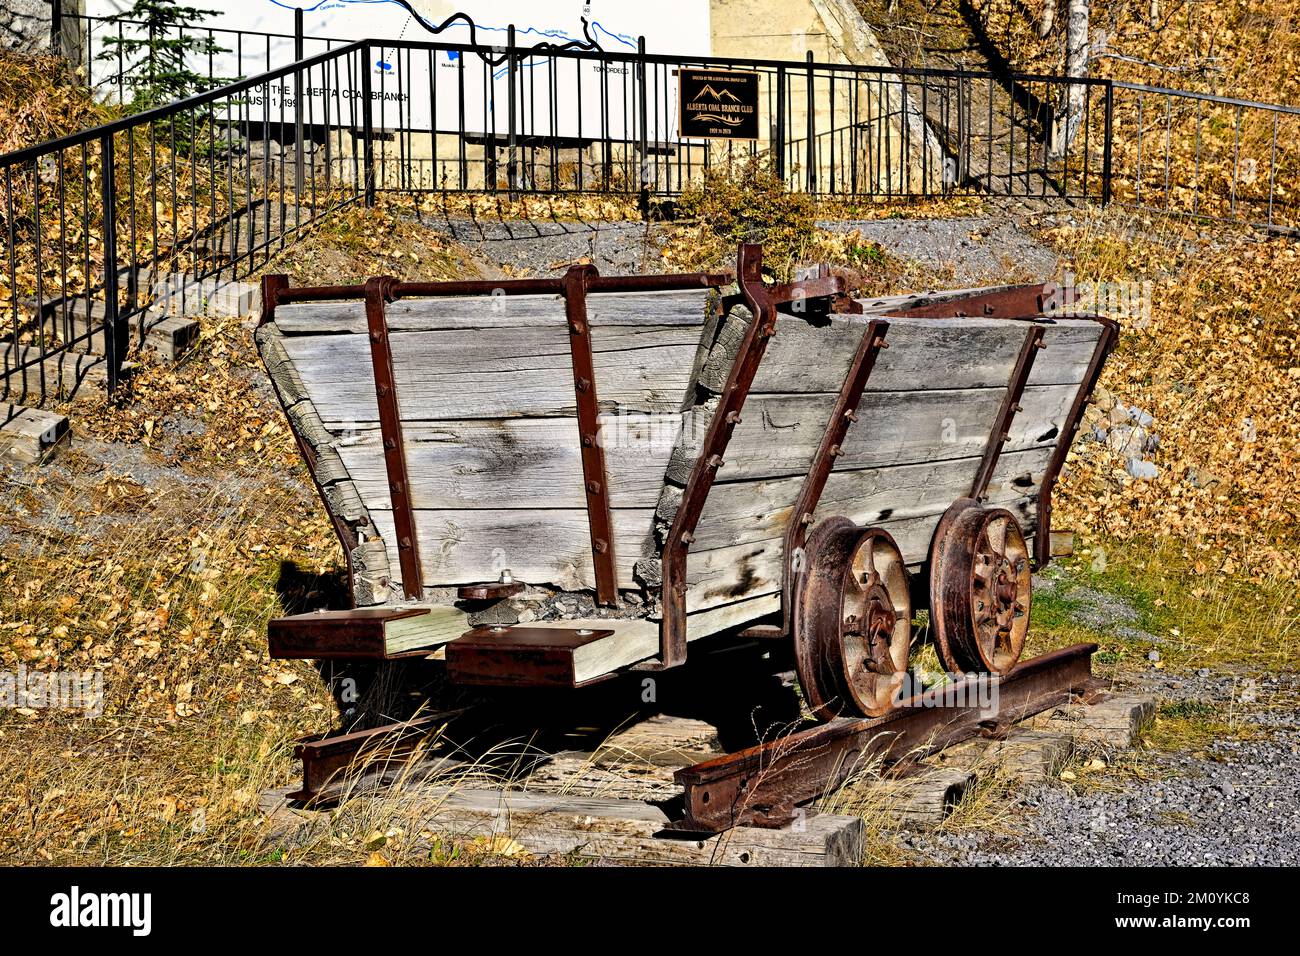 A wooden mining cart from the 1920 aera parked in front of a memorial to the coal mining industry in rural Alberta Canada. Stock Photo